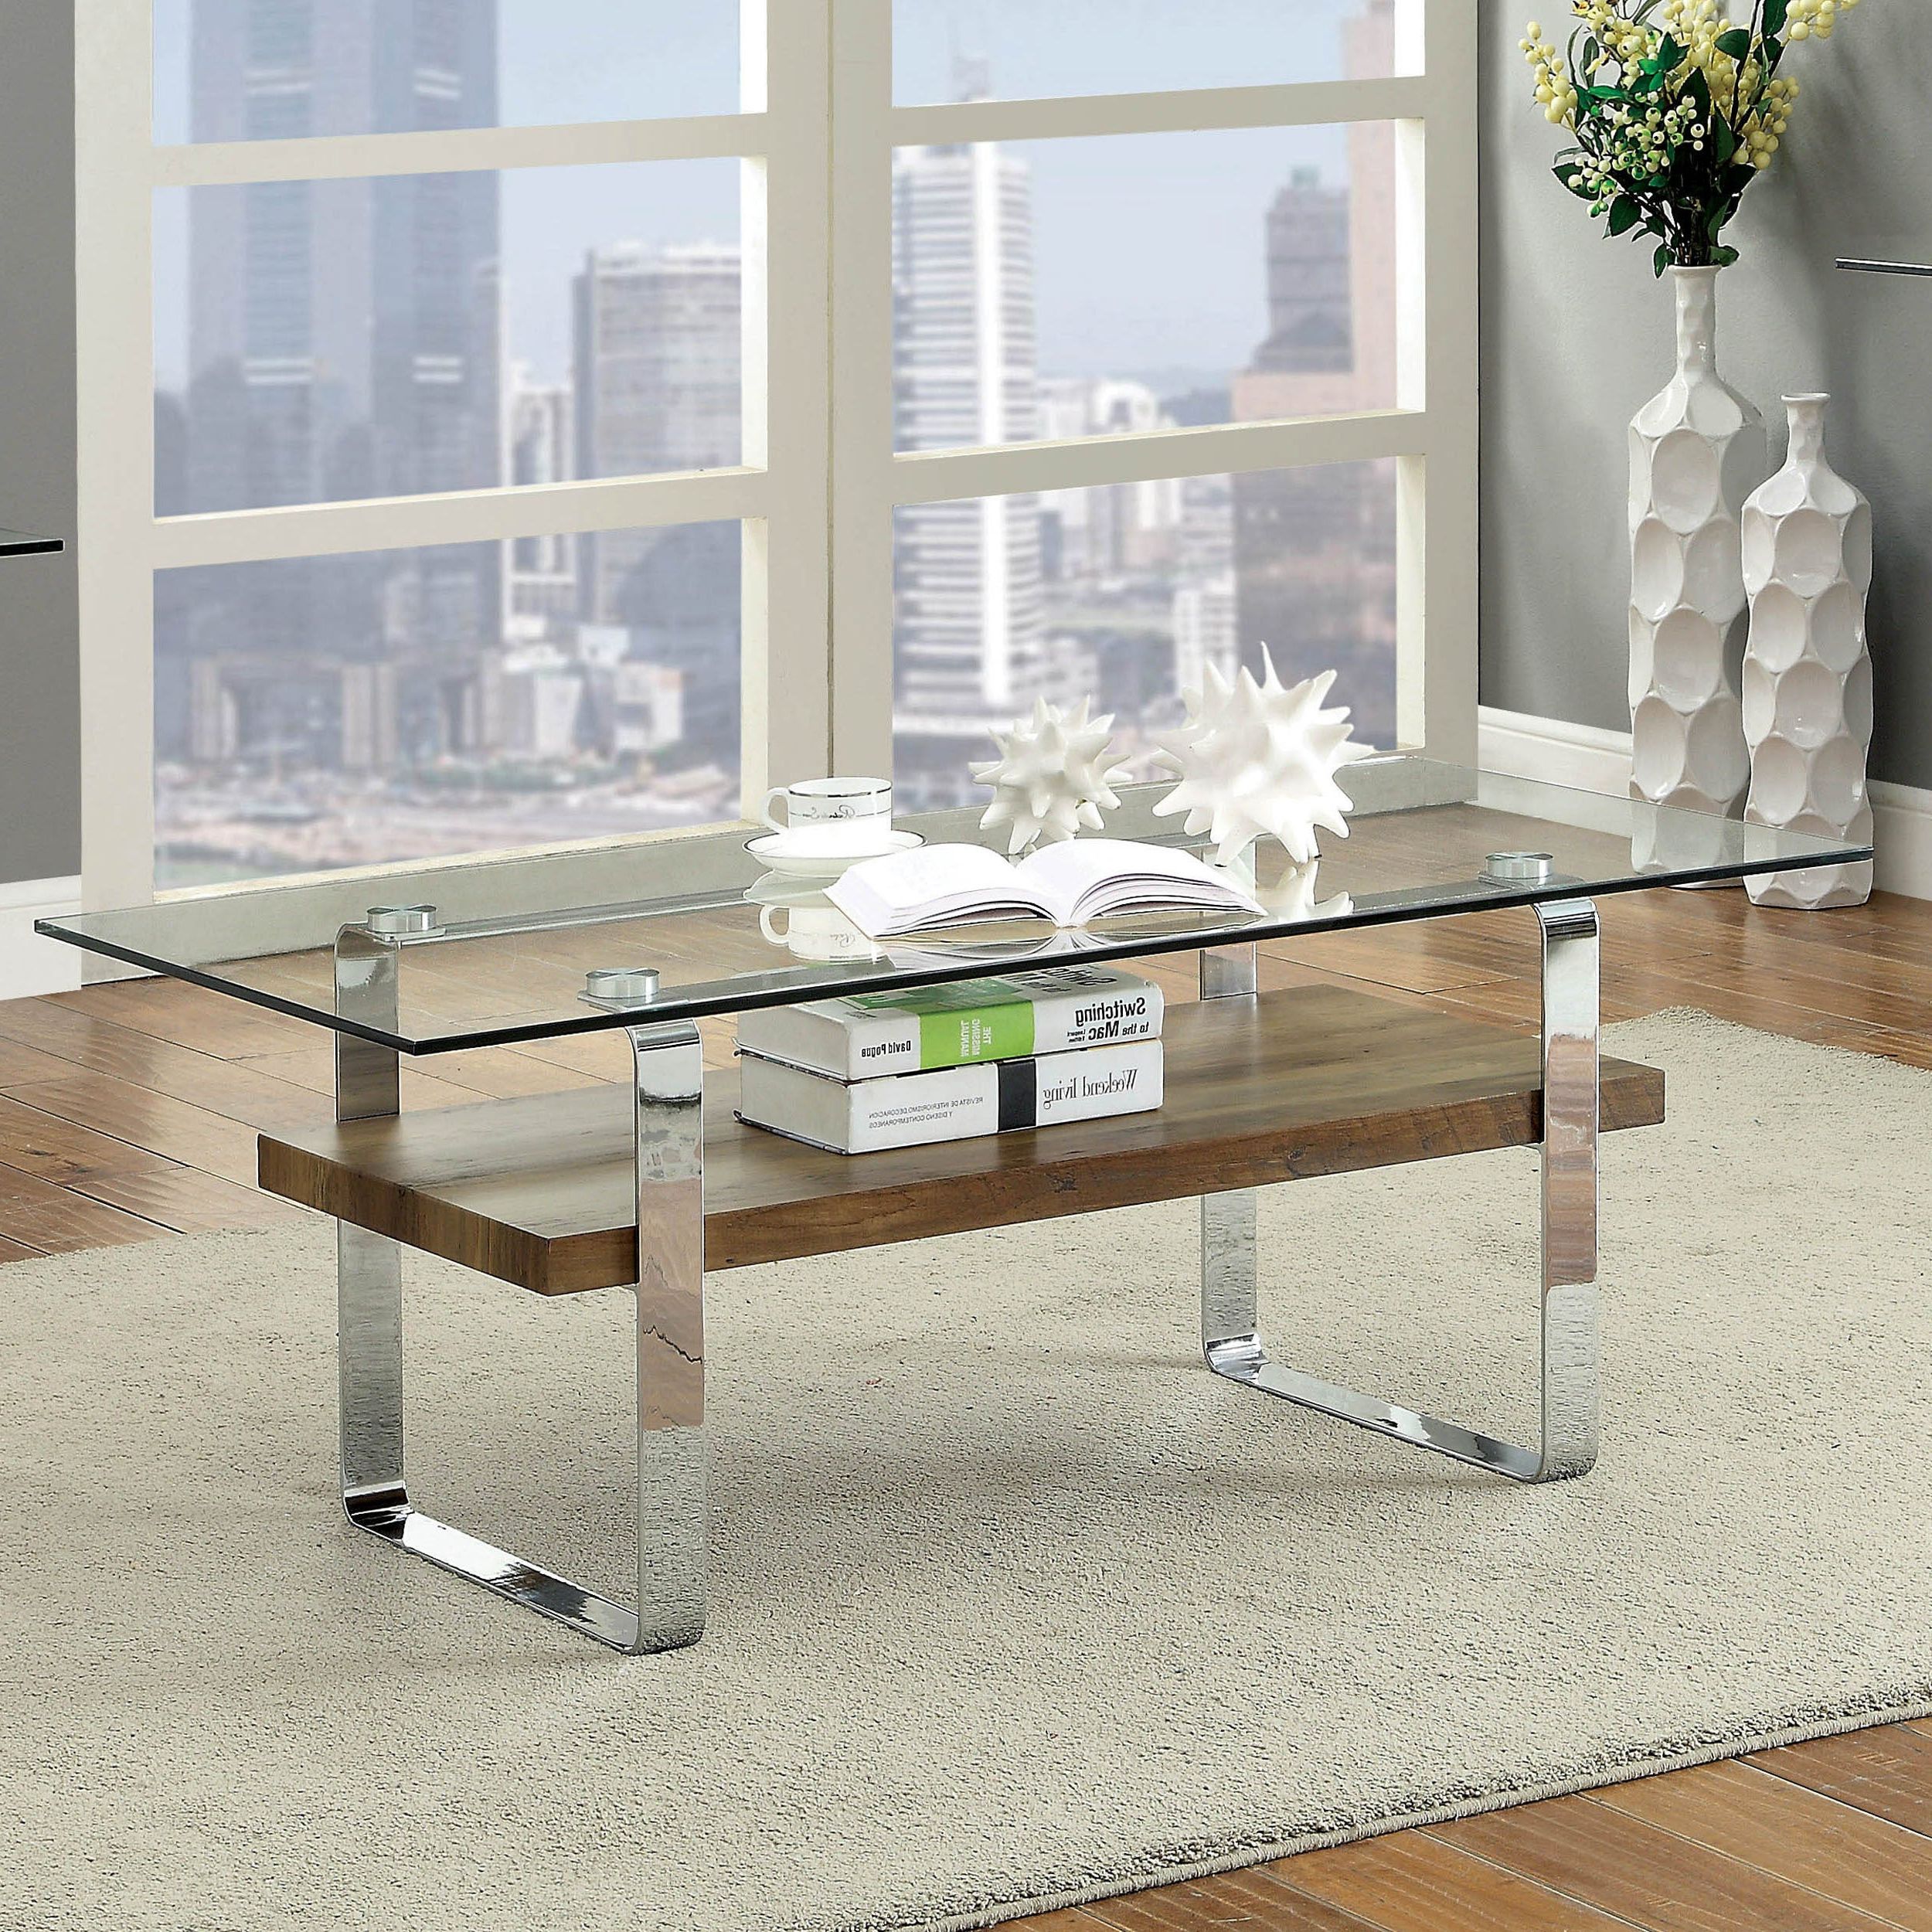 Well Known Thalberg Contemporary Chrome Coffee Tables By Foa With Regard To Catalan Contemporary Chrome Coffee Tablefoa (View 5 of 20)